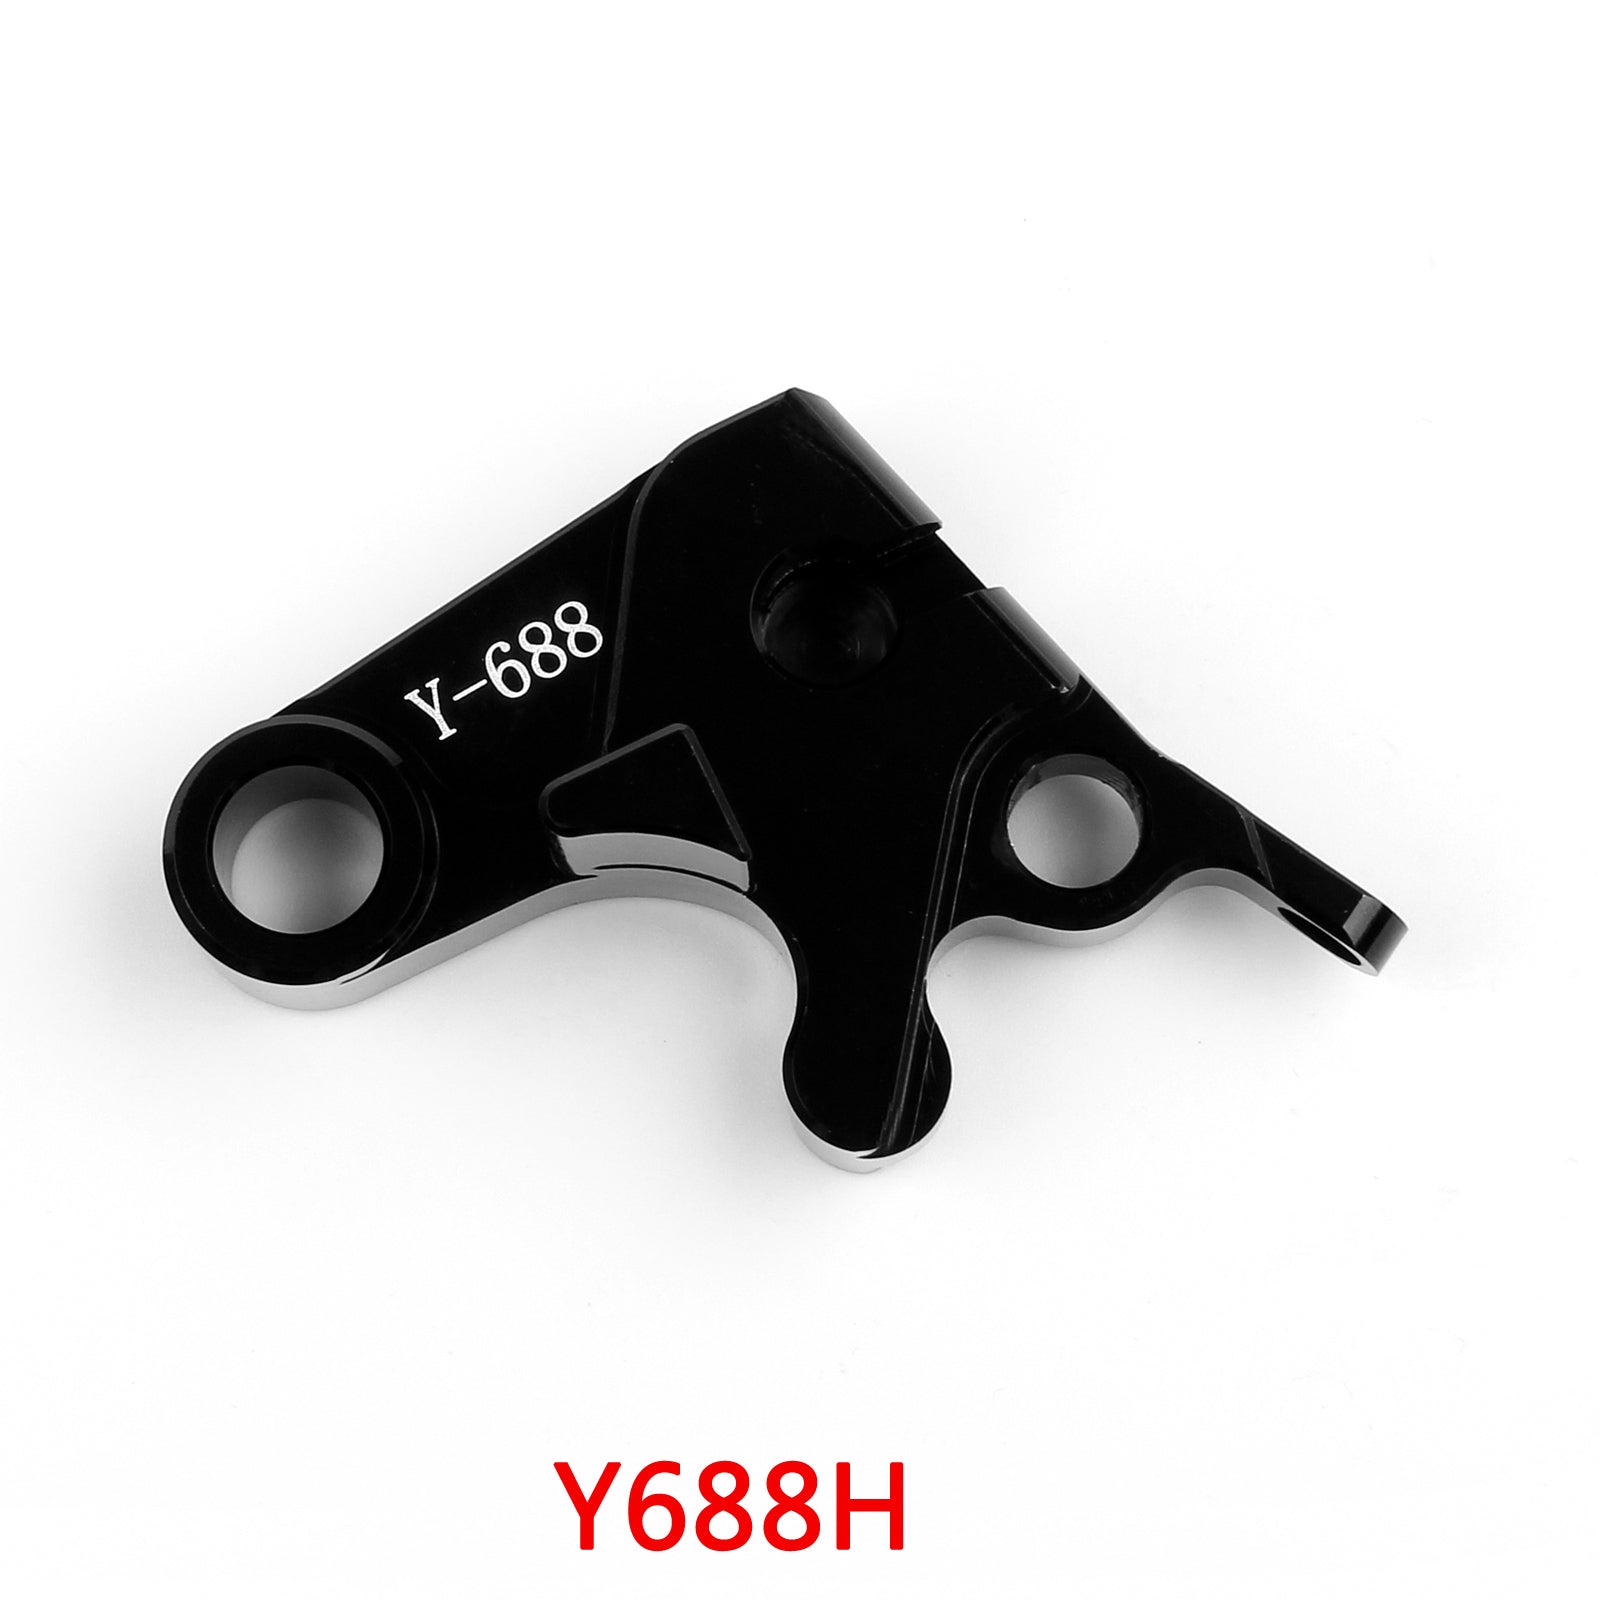 NEW Short Clutch Brake Lever fit for Yamaha YZF R1 2009-2014